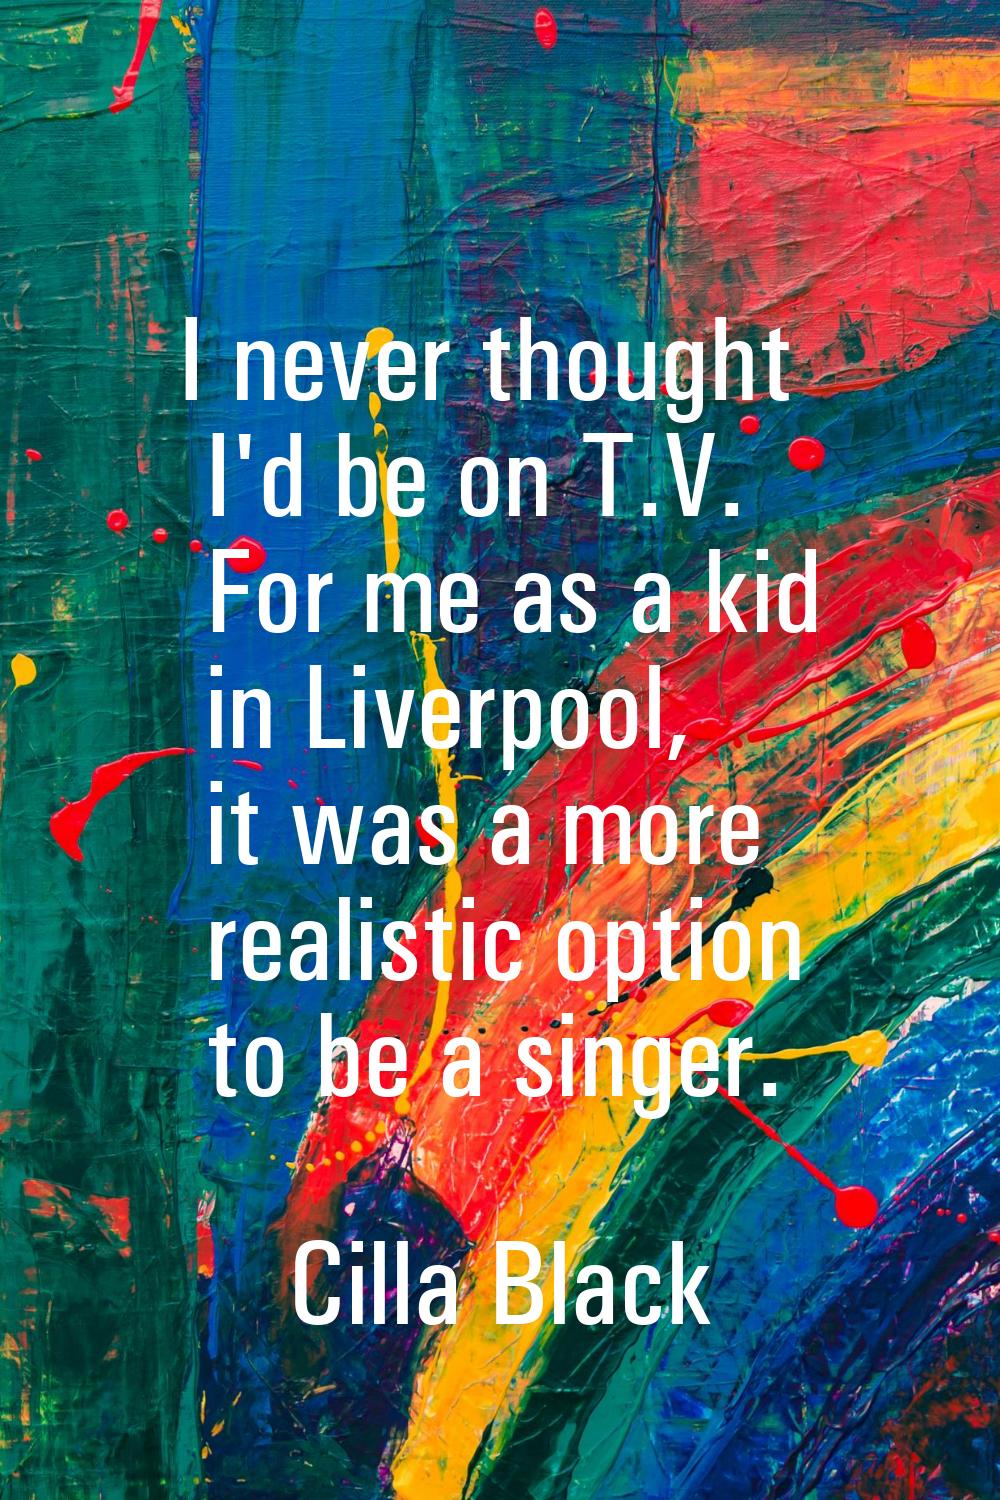 I never thought I'd be on T.V. For me as a kid in Liverpool, it was a more realistic option to be a